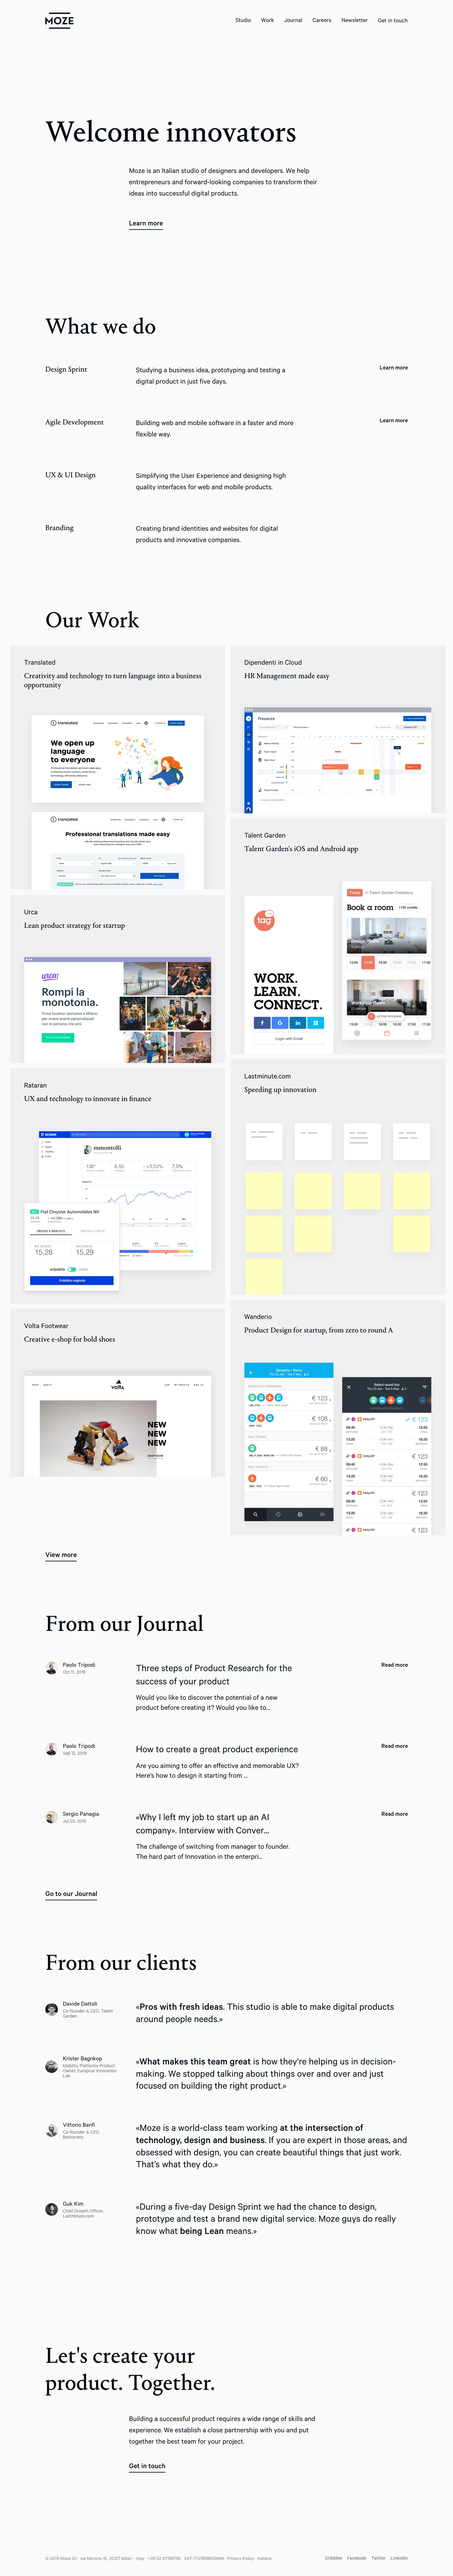 Moze Landing Page Example: Moze is an Italian studio of designers and developers. We help entrepreneurs and forward-looking companies to transform their ideas into successful digital products.